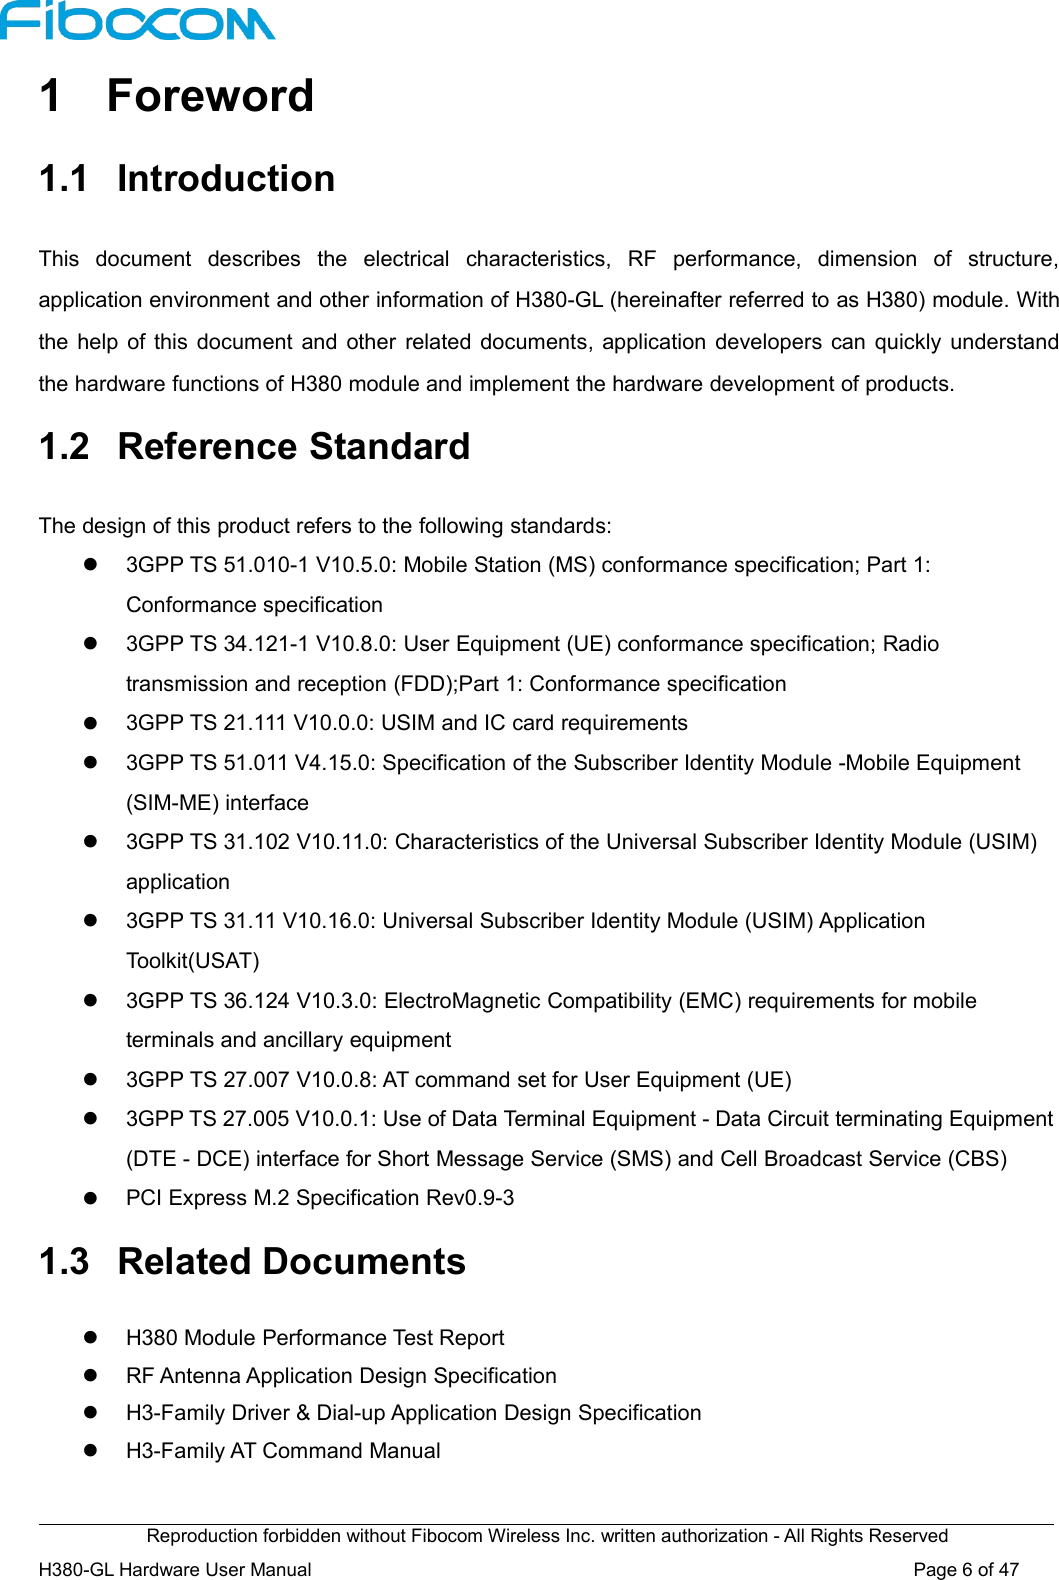 Reproduction forbidden without Fibocom Wireless Inc. written authorization - All Rights ReservedH380-GL Hardware User Manual Page6of471 Foreword1.1 IntroductionThis document describes the electrical characteristics, RF performance, dimension of structure,application environment and other information of H380-GL (hereinafter referred to as H380) module. Withthe help of this document and other related documents, application developers can quickly understandthe hardware functions of H380 module and implement the hardware development of products.1.2 Reference StandardThe design of this product refers to the following standards:3GPP TS 51.010-1 V10.5.0: Mobile Station (MS) conformance specification; Part 1:Conformance specification3GPP TS 34.121-1 V10.8.0: User Equipment (UE) conformance specification; Radiotransmission and reception (FDD);Part 1: Conformance specification3GPP TS 21.111 V10.0.0: USIM and IC card requirements3GPP TS 51.011 V4.15.0: Specification of the Subscriber Identity Module -Mobile Equipment(SIM-ME) interface3GPP TS 31.102 V10.11.0: Characteristics of the Universal Subscriber Identity Module (USIM)application3GPP TS 31.11 V10.16.0: Universal Subscriber Identity Module (USIM) ApplicationToolkit(USAT)3GPP TS 36.124 V10.3.0: ElectroMagnetic Compatibility (EMC) requirements for mobileterminals and ancillary equipment3GPP TS 27.007 V10.0.8: AT command set for User Equipment (UE)3GPP TS 27.005 V10.0.1: Use of Data Terminal Equipment - Data Circuit terminating Equipment(DTE - DCE) interface for Short Message Service (SMS) and Cell Broadcast Service (CBS)PCI Express M.2 Specification Rev0.9-31.3 Related DocumentsH380 Module Performance Test ReportRF Antenna Application Design SpecificationH3-Family Driver &amp; Dial-up Application Design SpecificationH3-Family AT Command Manual